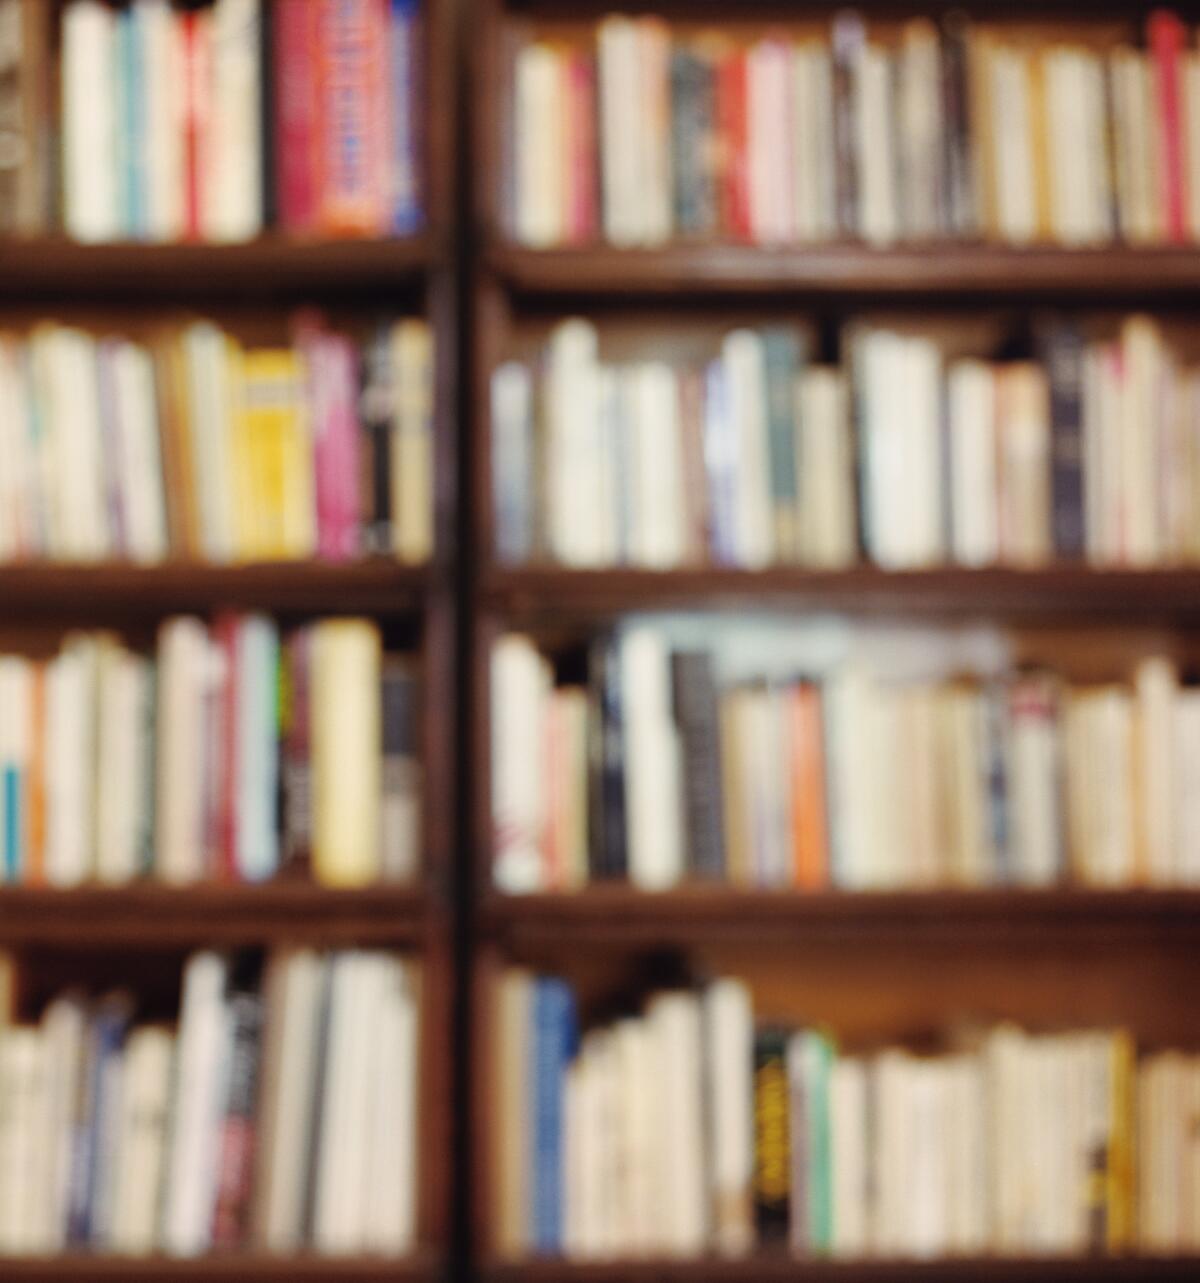 An out-of focus image shows books on a shelf. 